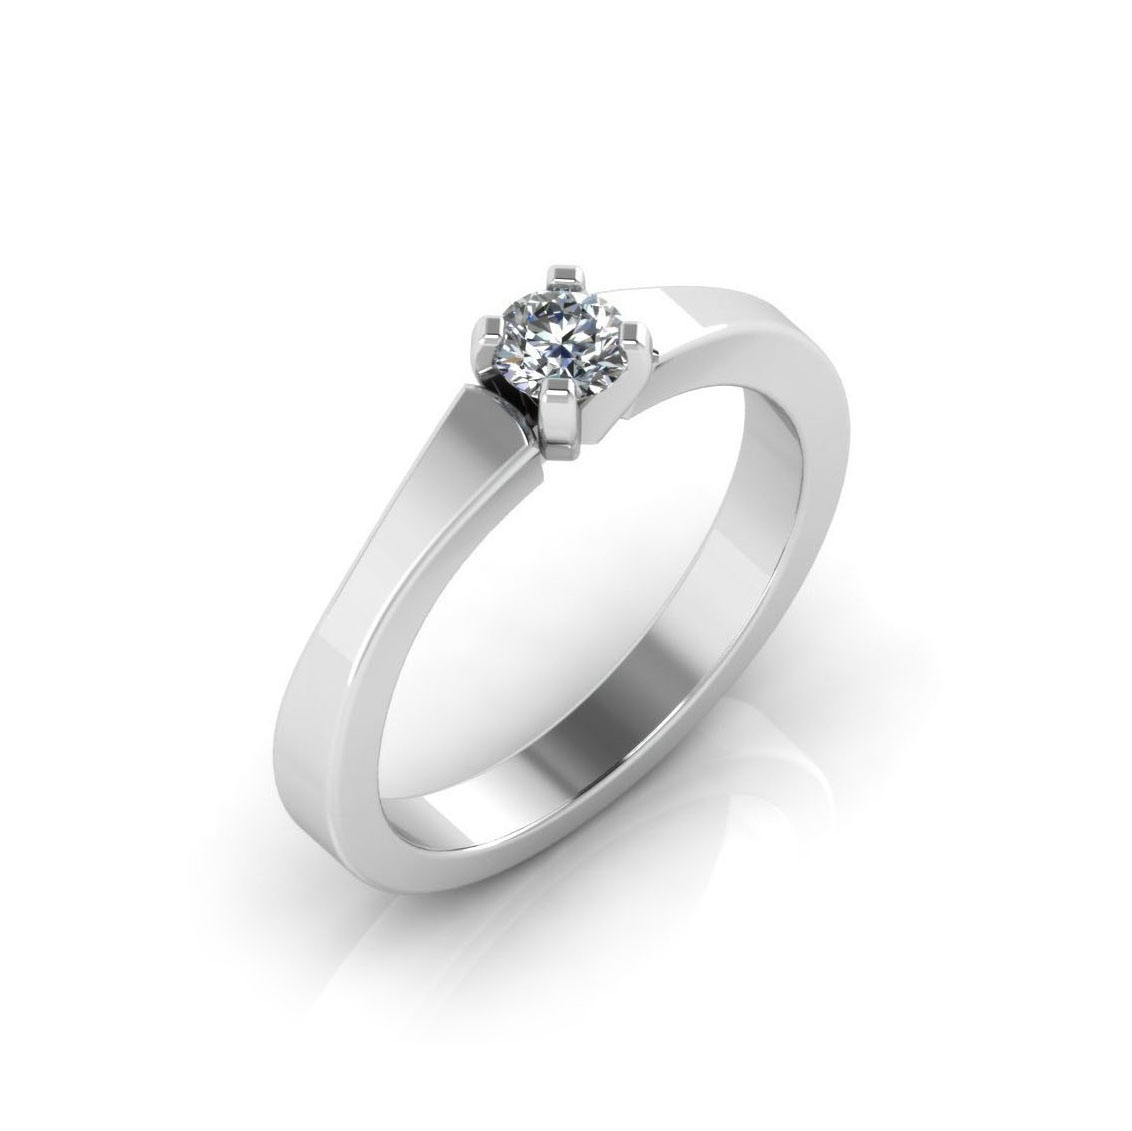 The James Platinum Ring For Him - Diamond Jewellery at Best Prices in India  | SarvadaJewels.com